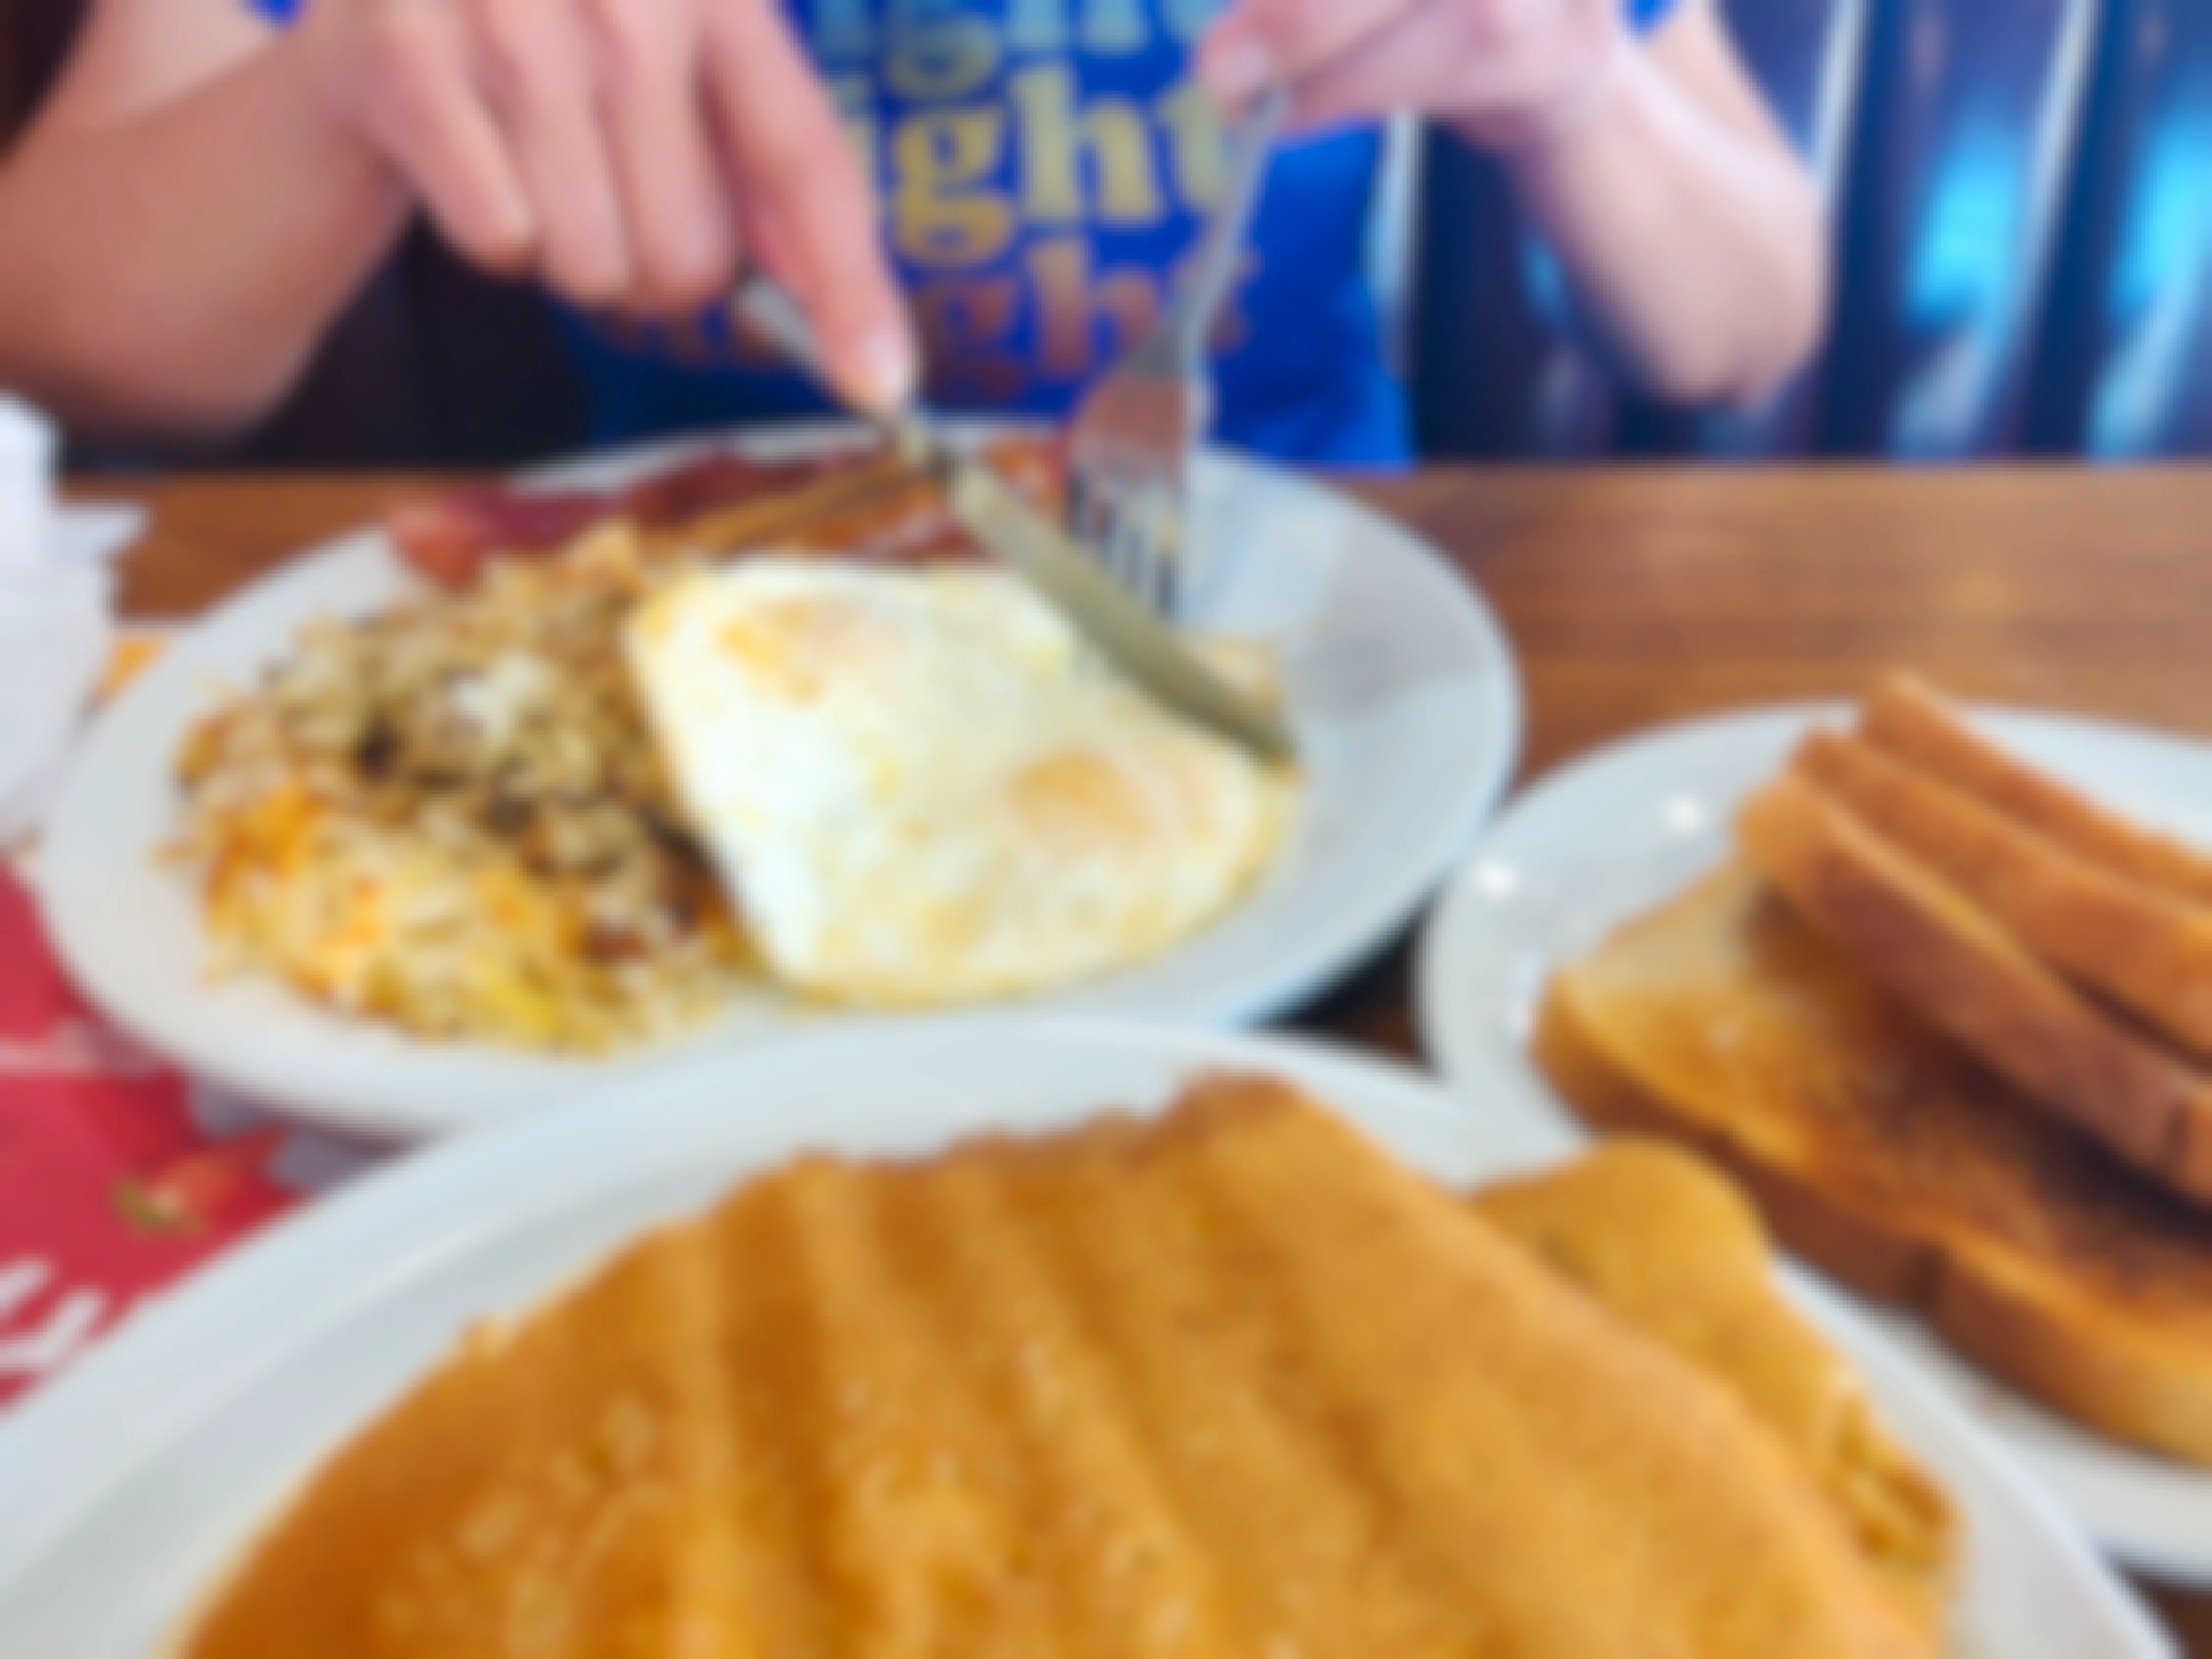 A person's hands using a fork and knife to cut into some eggs on a plate with eggs, hash browns, and sausage on the table next to a plate of pancakes and another plate with toast.